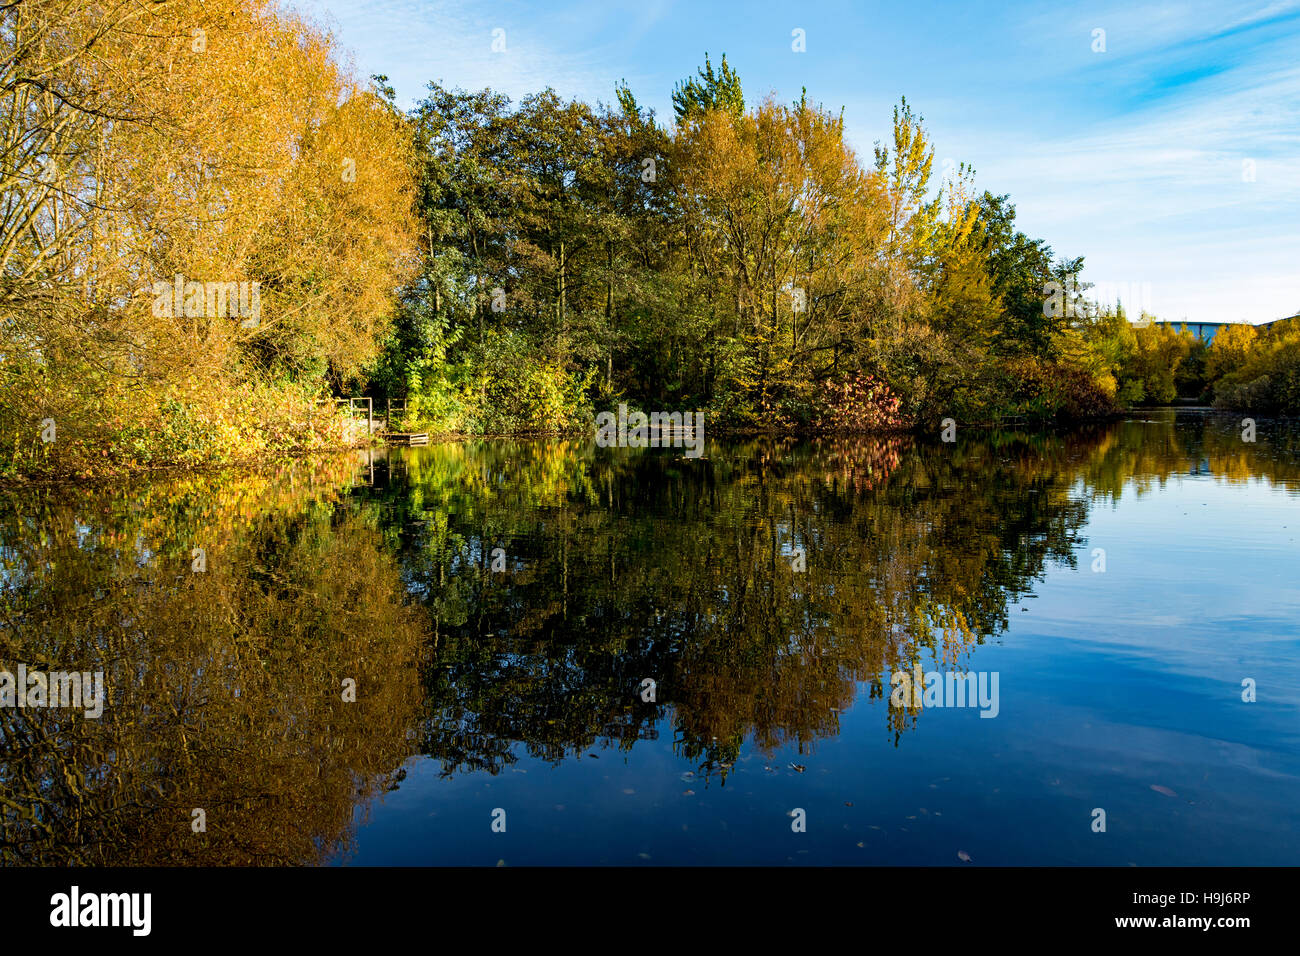 The lake at the Trafford Ecology Park, Trafford Park, Manchester, England, UK Stock Photo